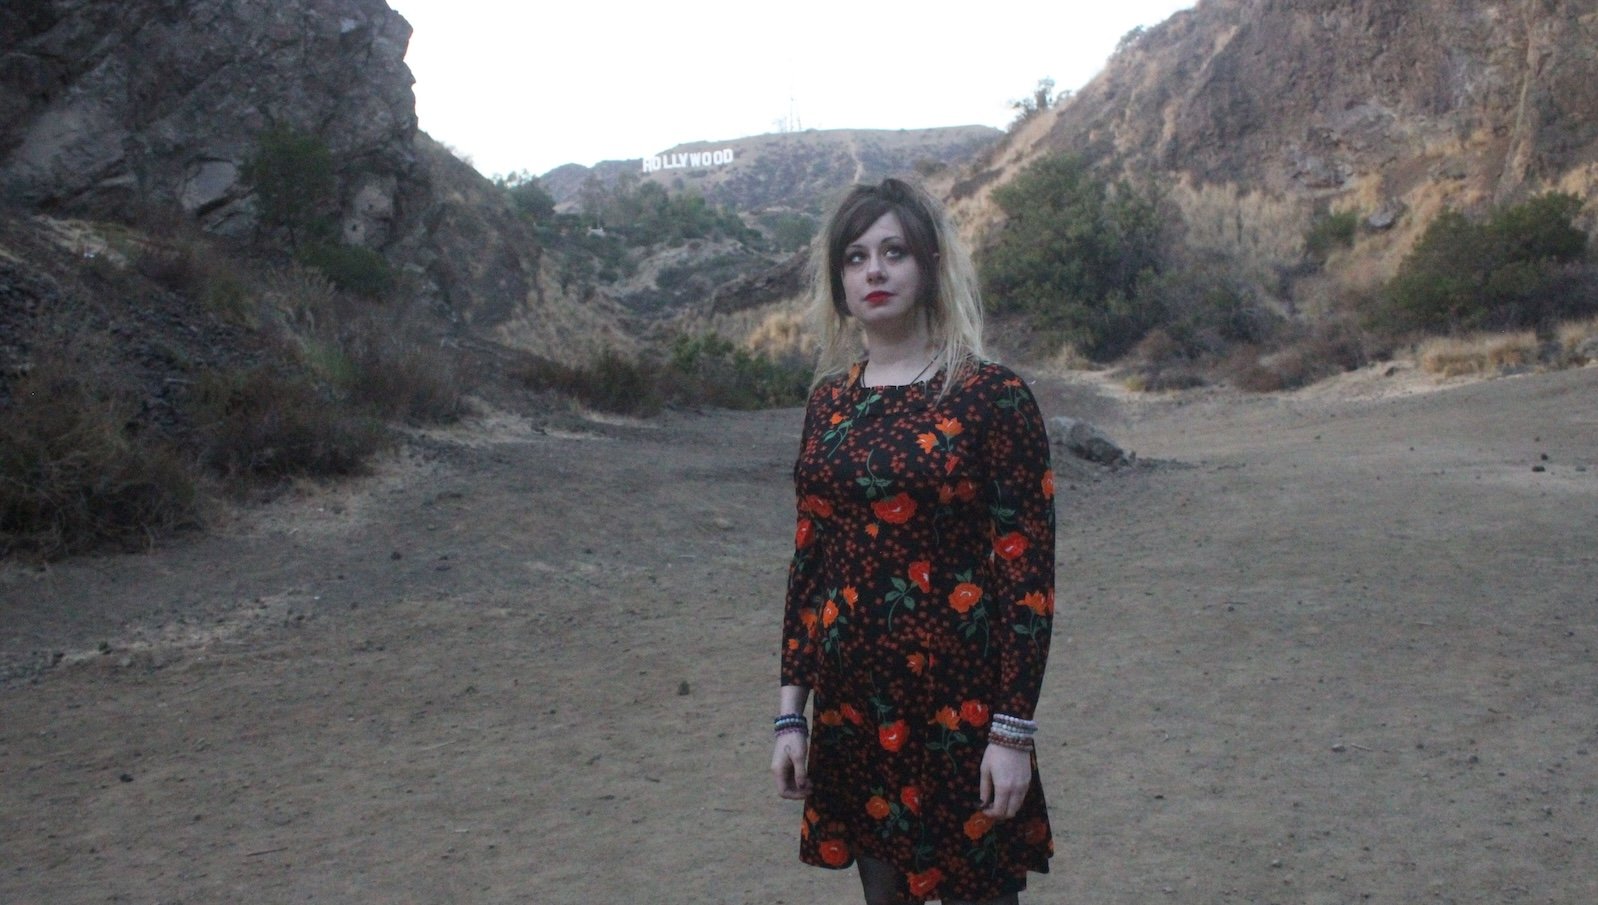 A girl in a red flowery dress and dyed blonde hair looks up while standing at the beach, which the HOLLYWOOD sign far in the background distance